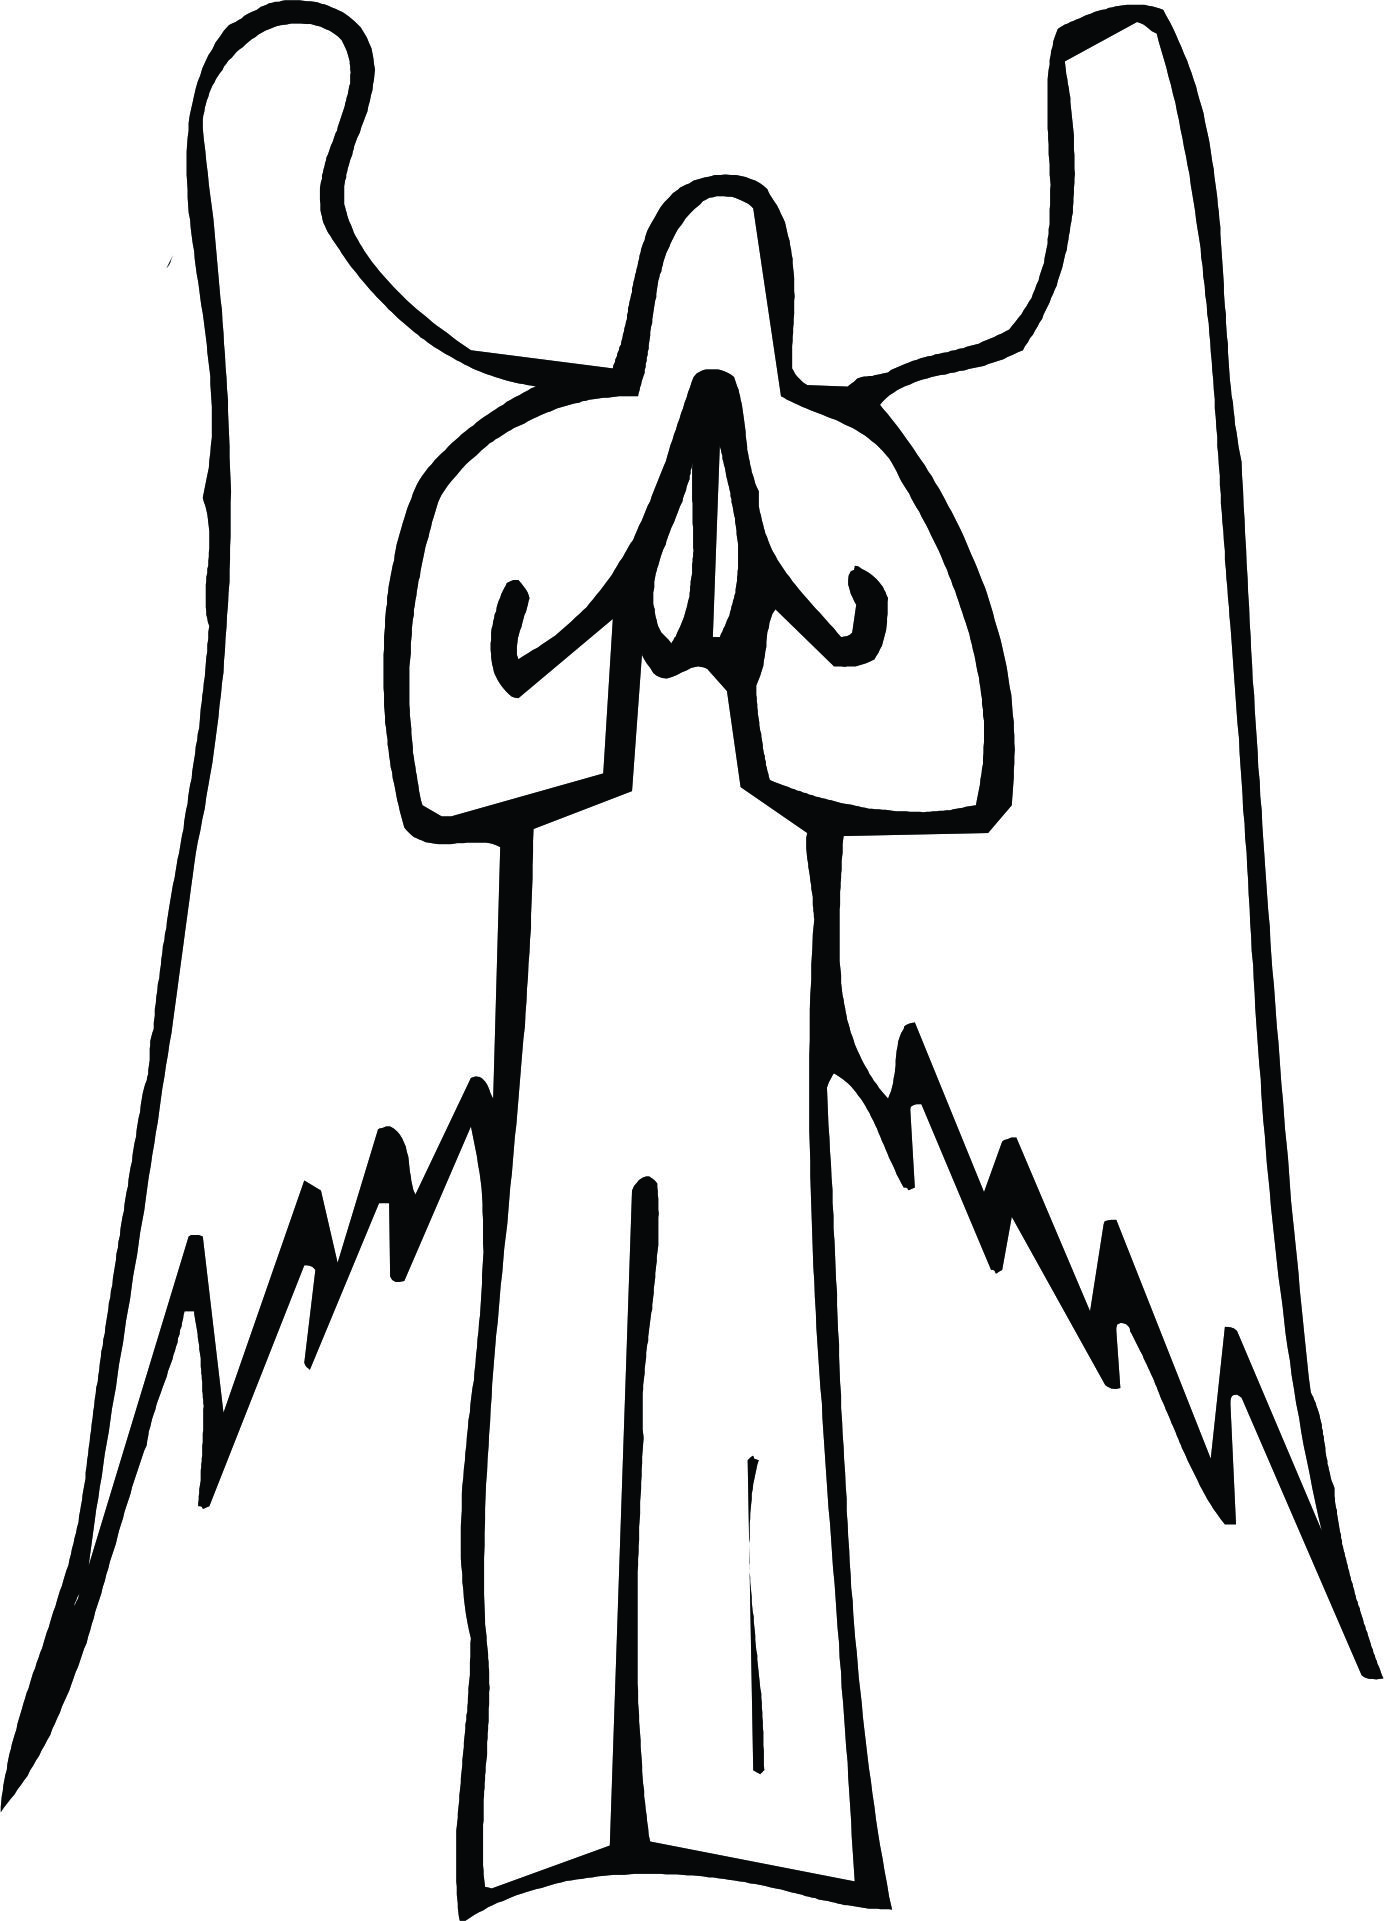 Angel Line Drawing - ClipArt Best